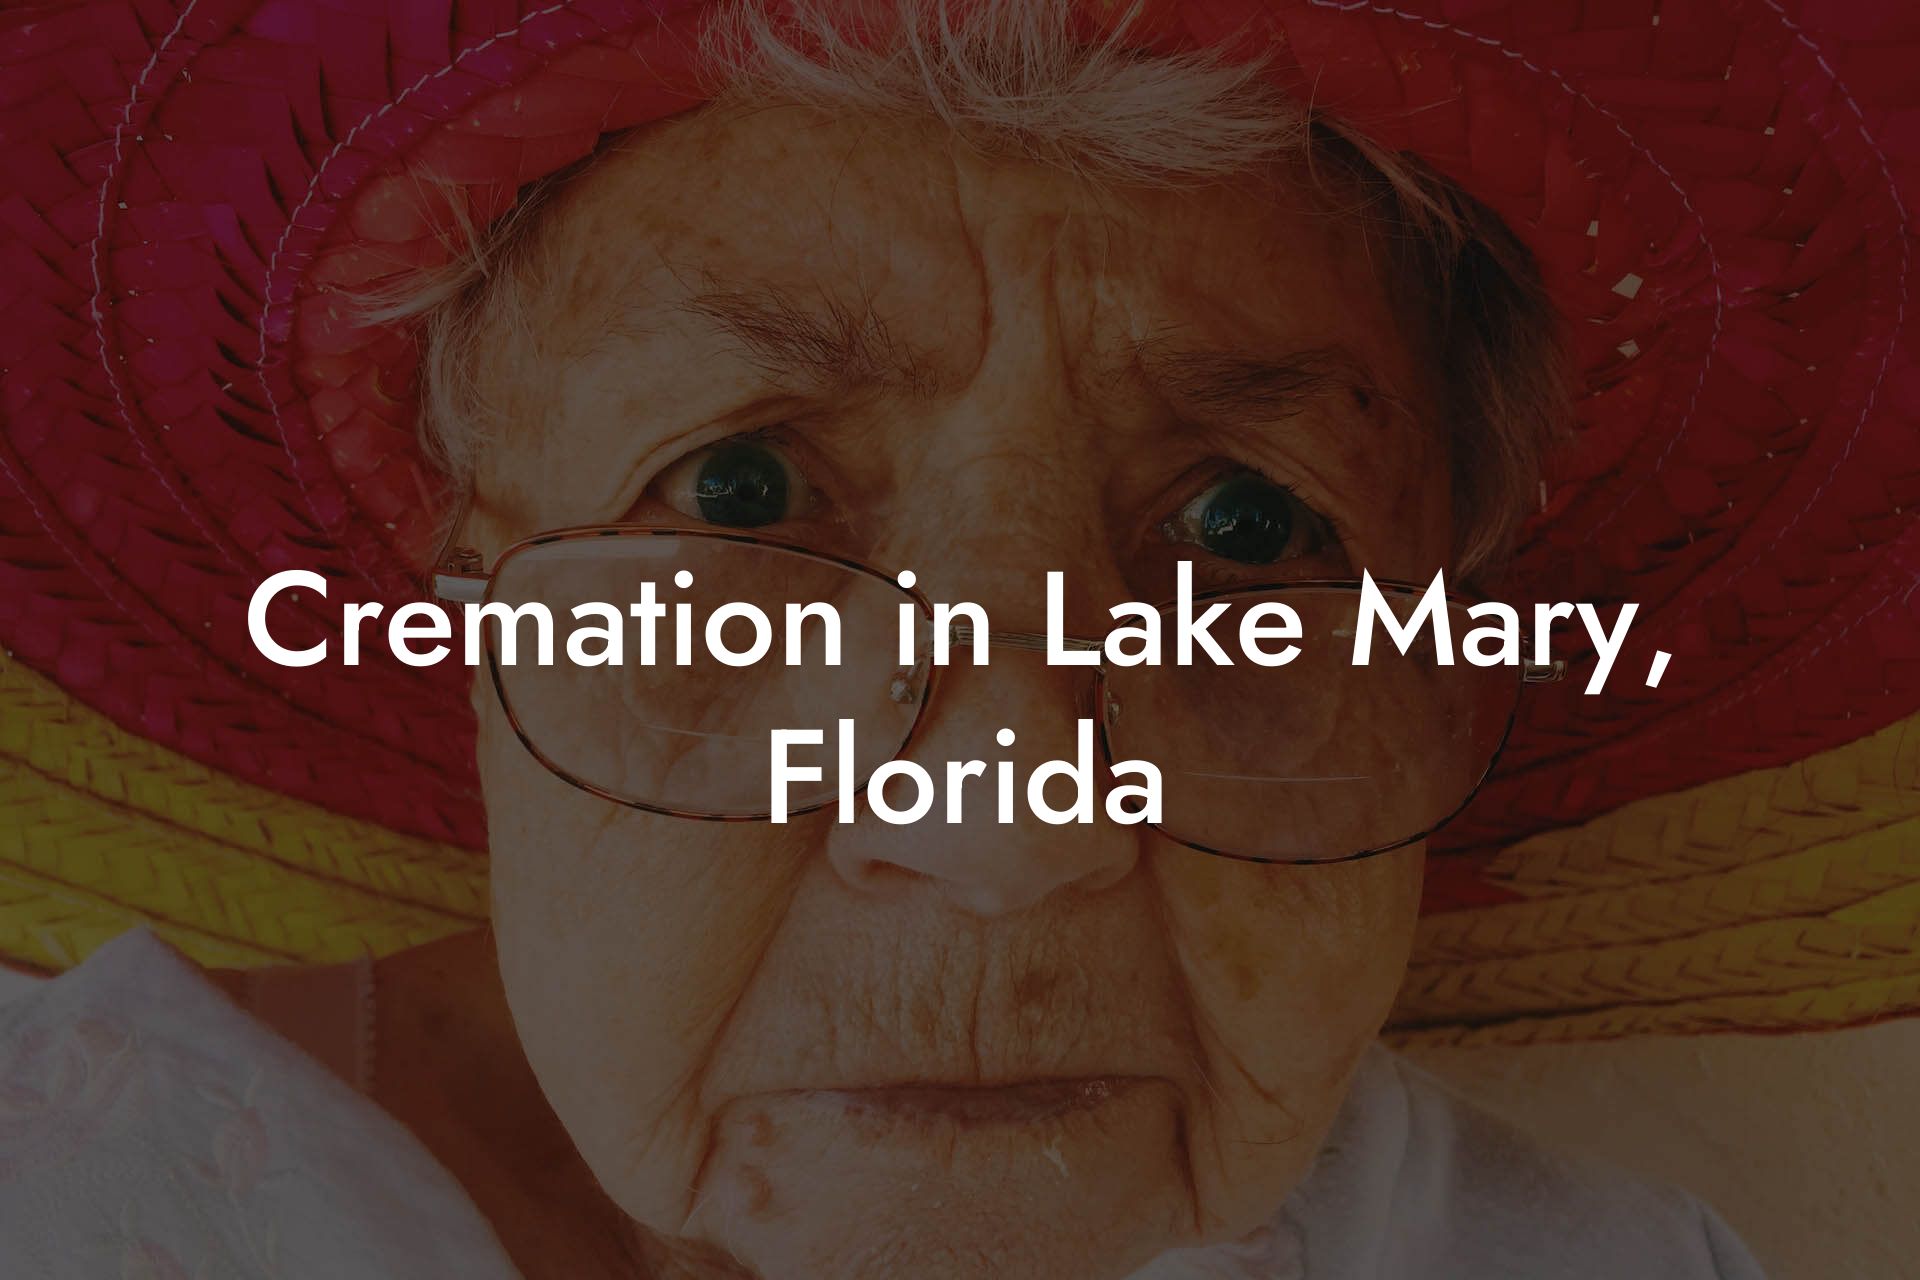 Cremation in Lake Mary, Florida